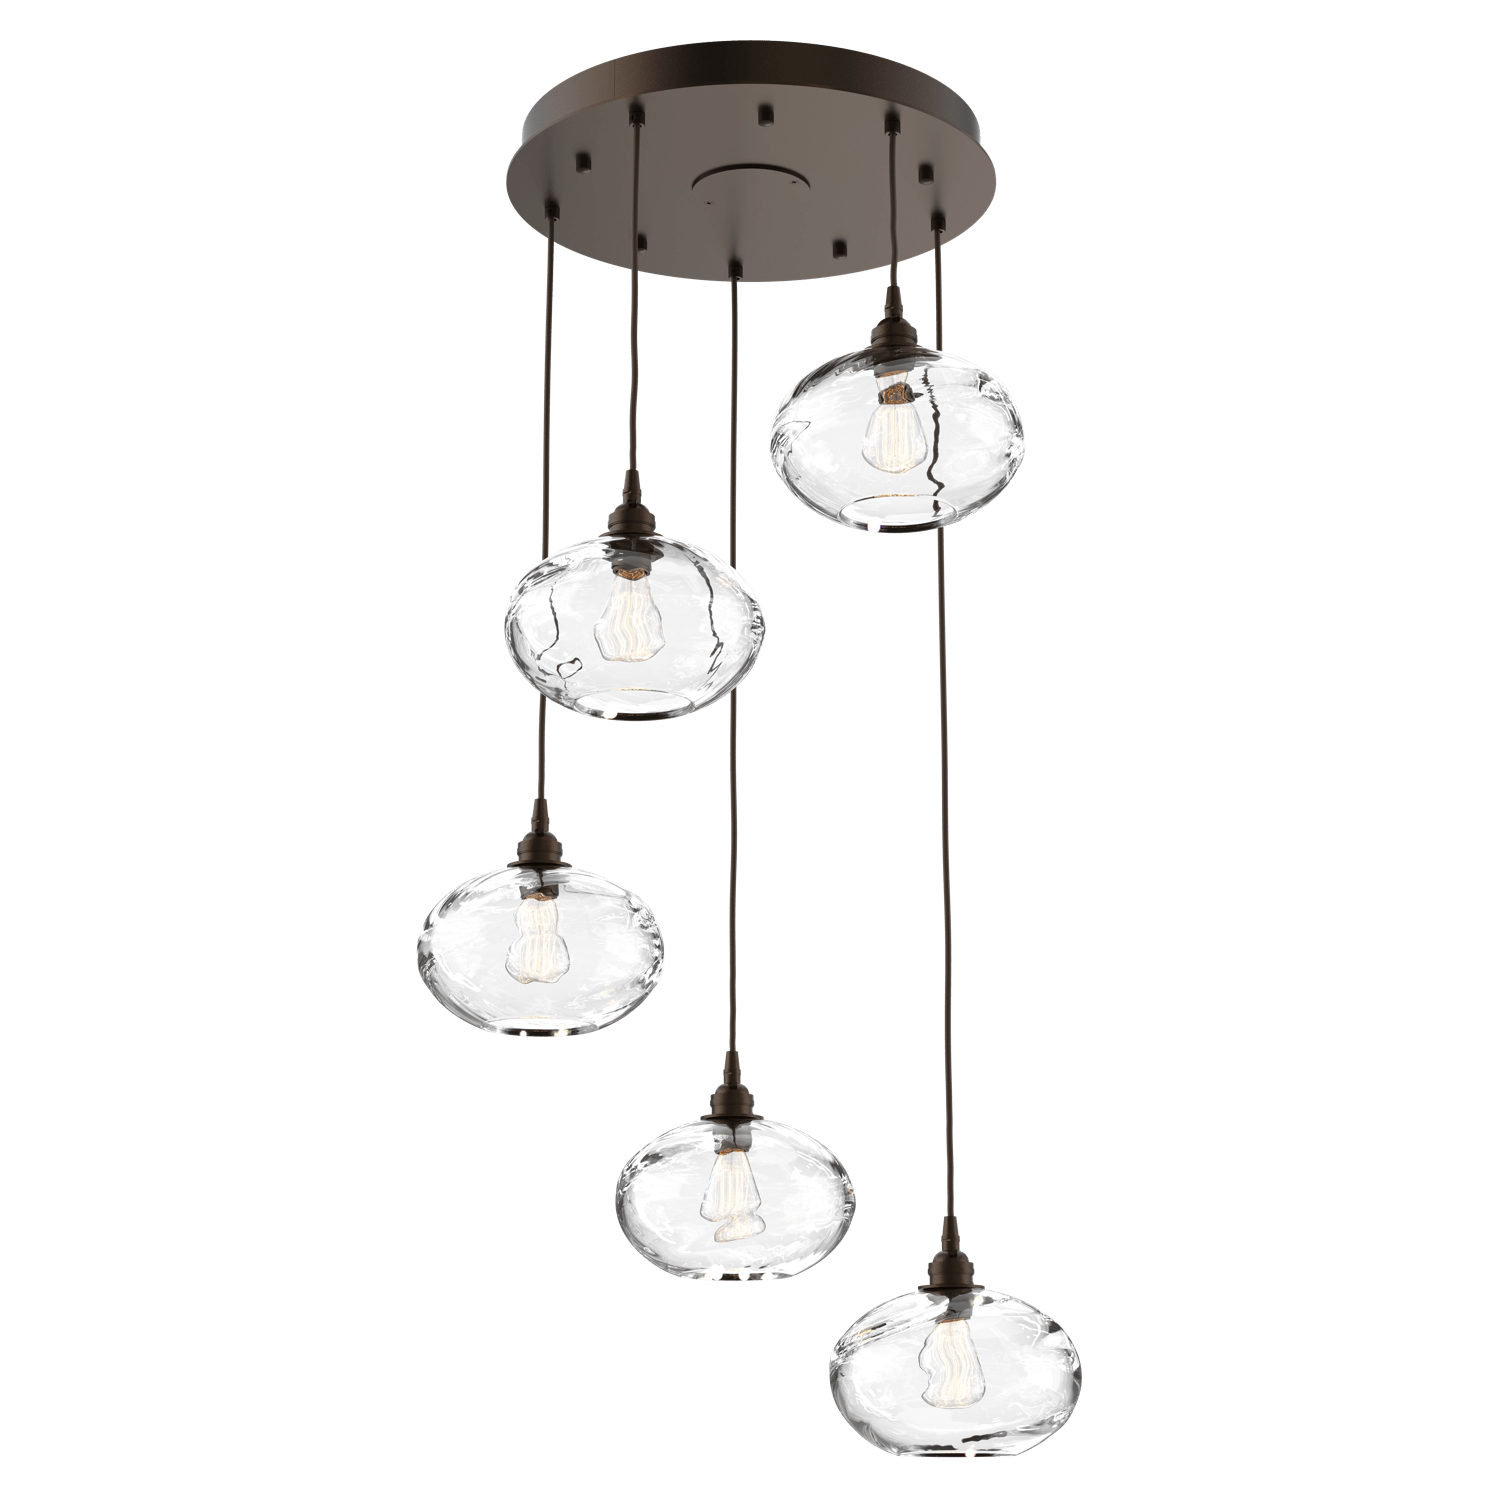 CHB0036-05-FB-OC-Hammerton-Studio-Optic-Blown-Glass-Coppa-5-light-round-pendant-chandelier-with-flat-bronze-finish-and-optic-clear-blown-glass-shades-and-incandescent-lamping